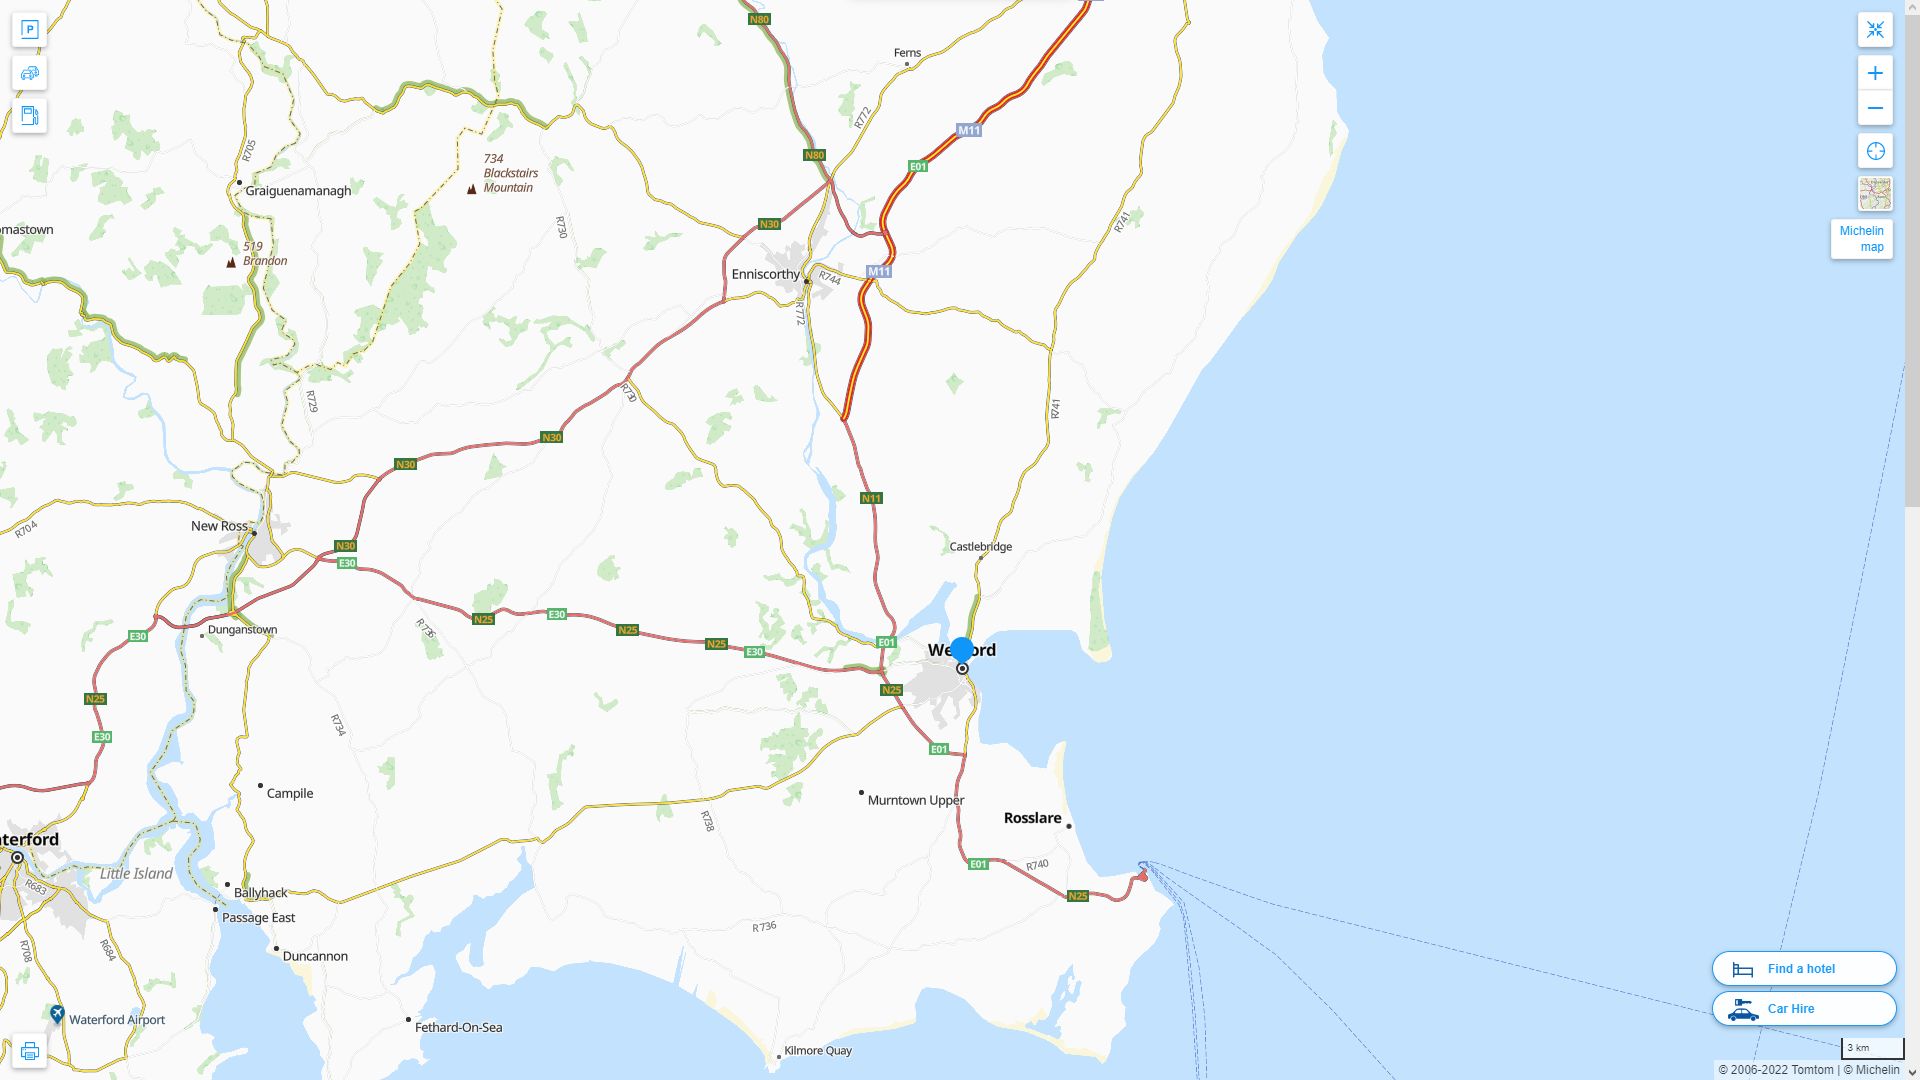 Wexford Highway and Road Map